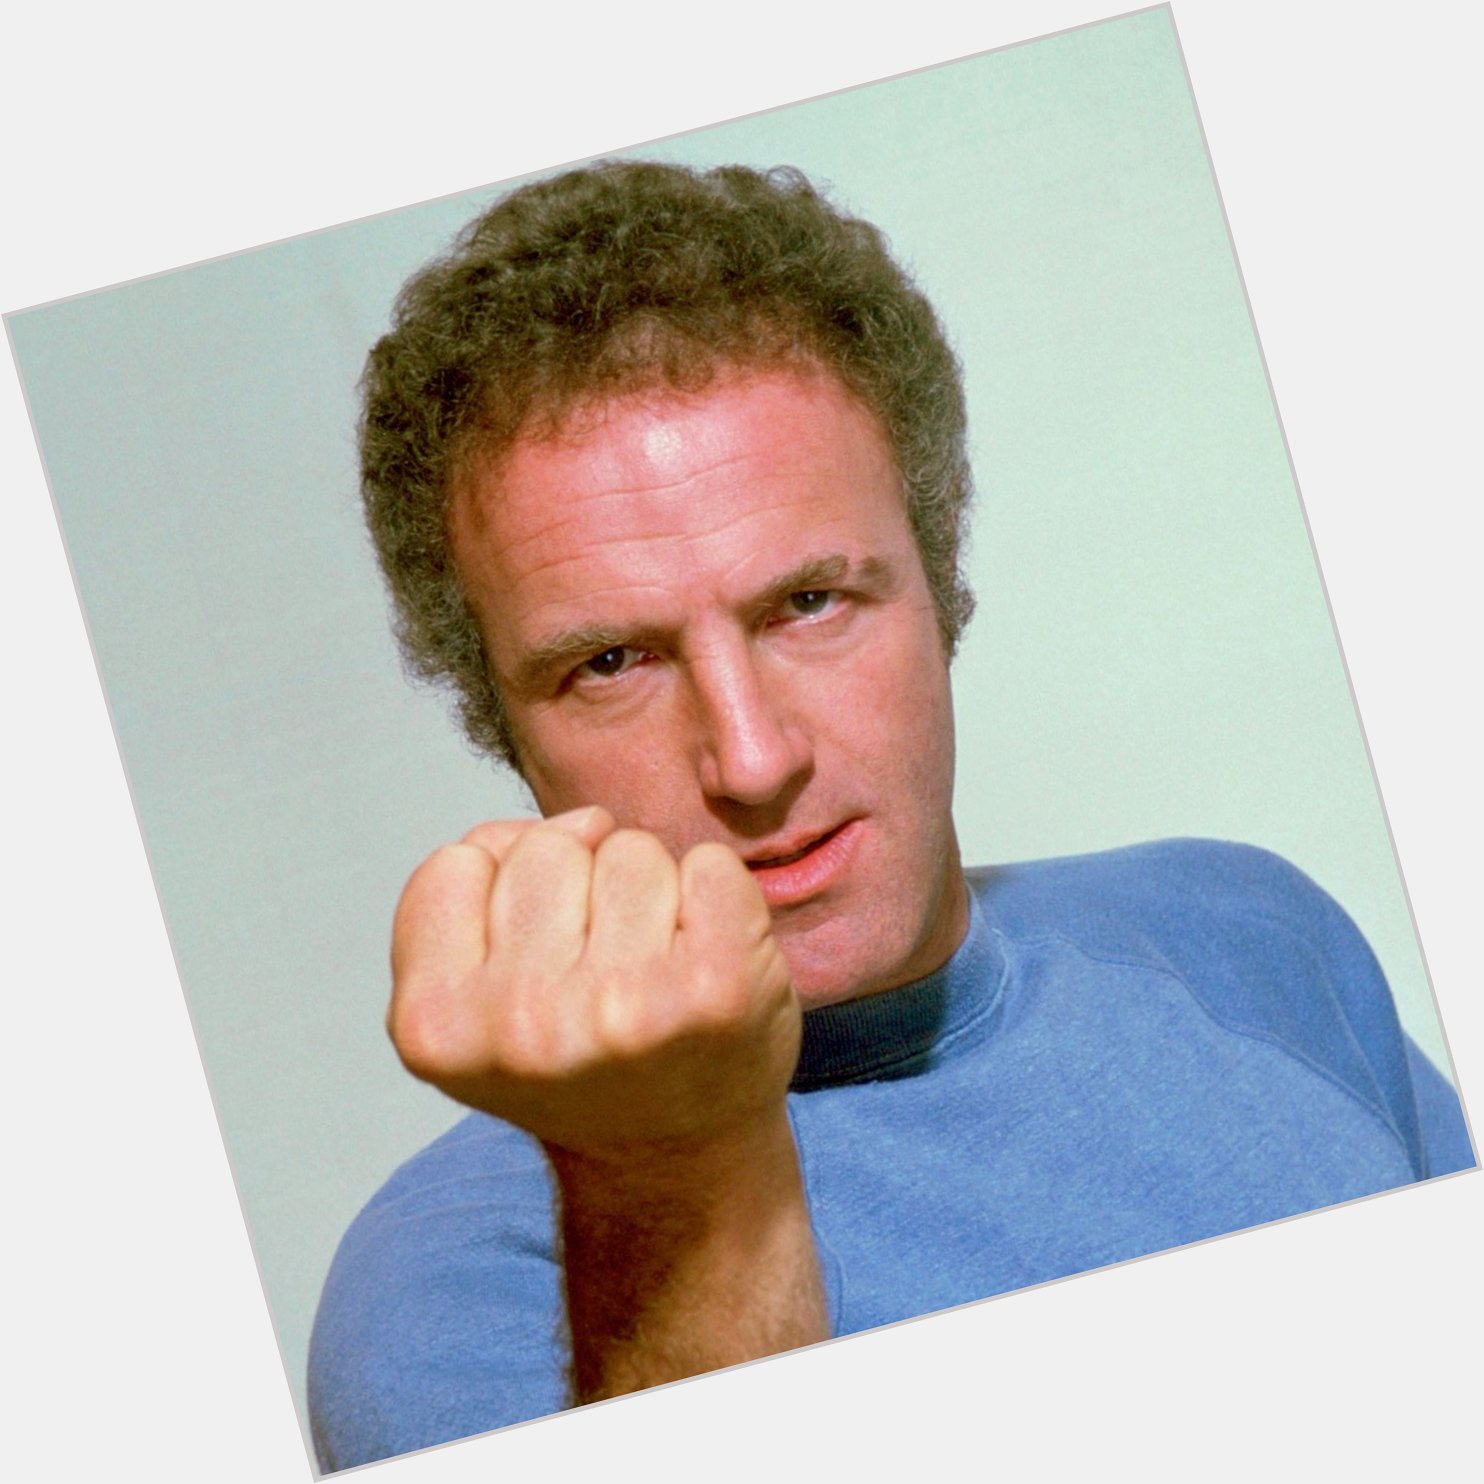  The most talented people are always the nicest. Happy 79th birthday, James Caan. 